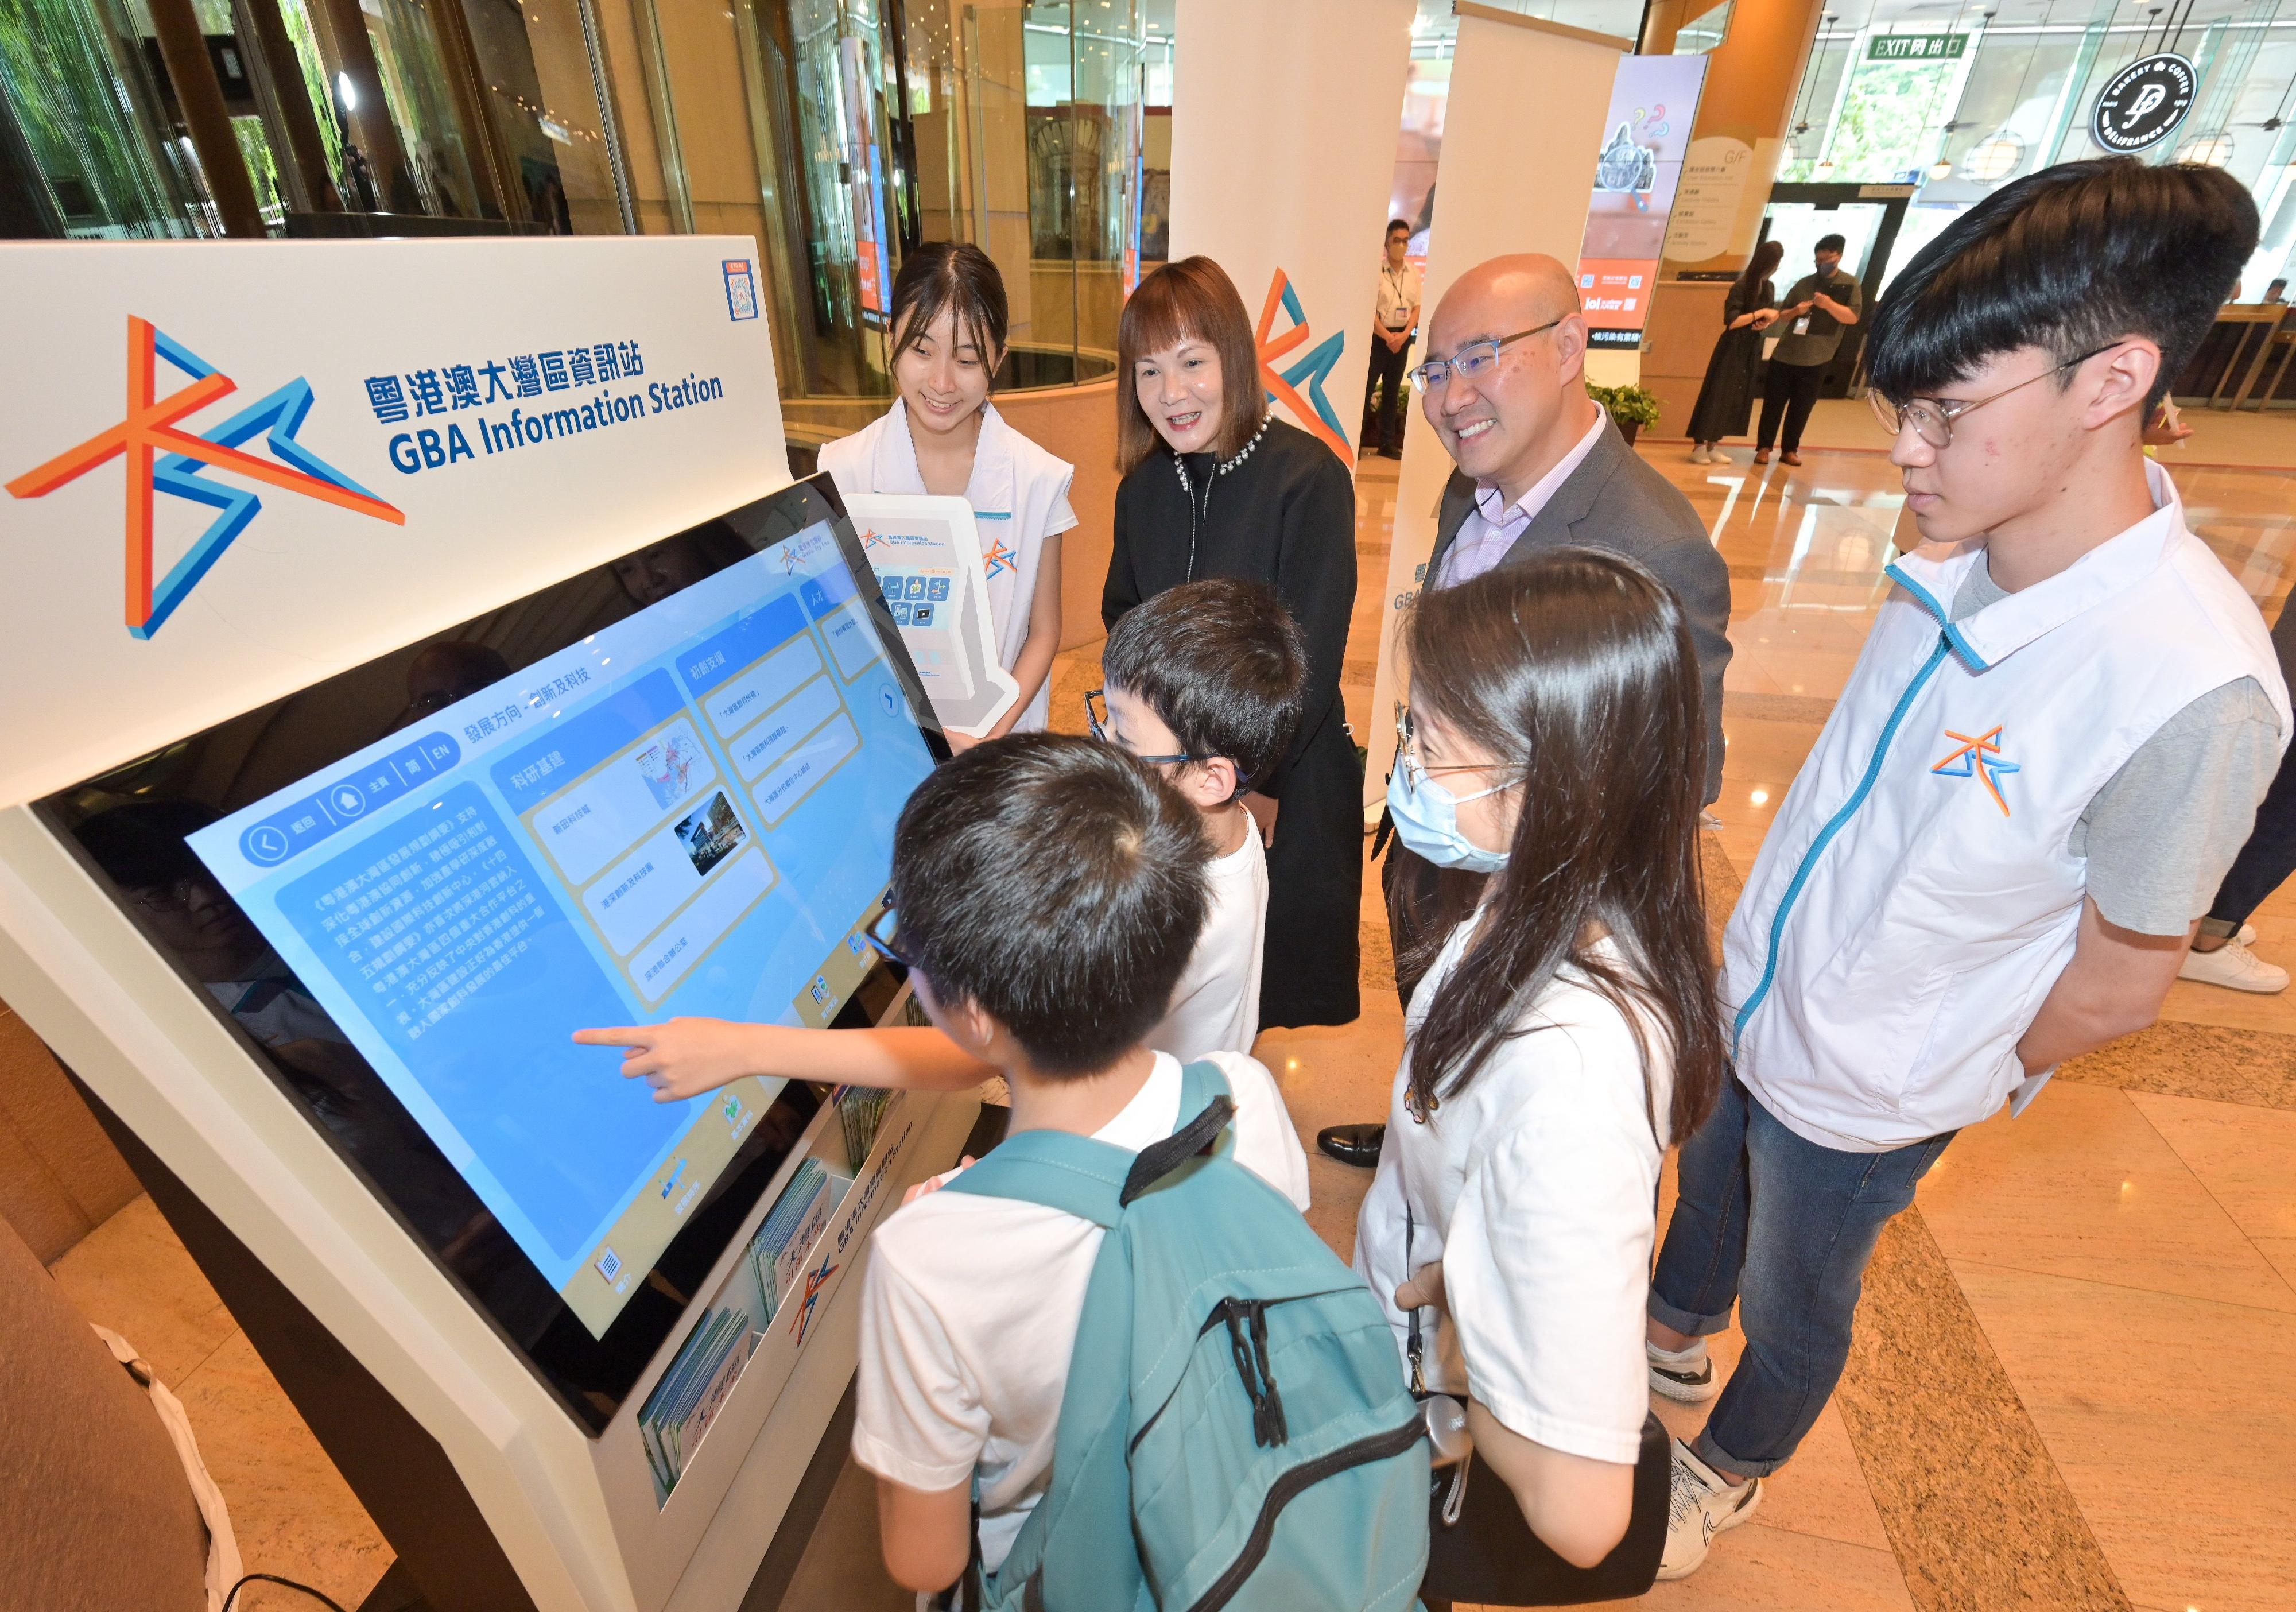 The Commissioner for the Development of the Guangdong-Hong Kong-Macao Greater Bay Area, Ms Maisie Chan (second left), visits the "Greater Bay Area Information Station" (GBAIS) located at the Hong Kong Central Library today (August 28) and introduces to the members of the public the diverse and informative content of the GBAIS.